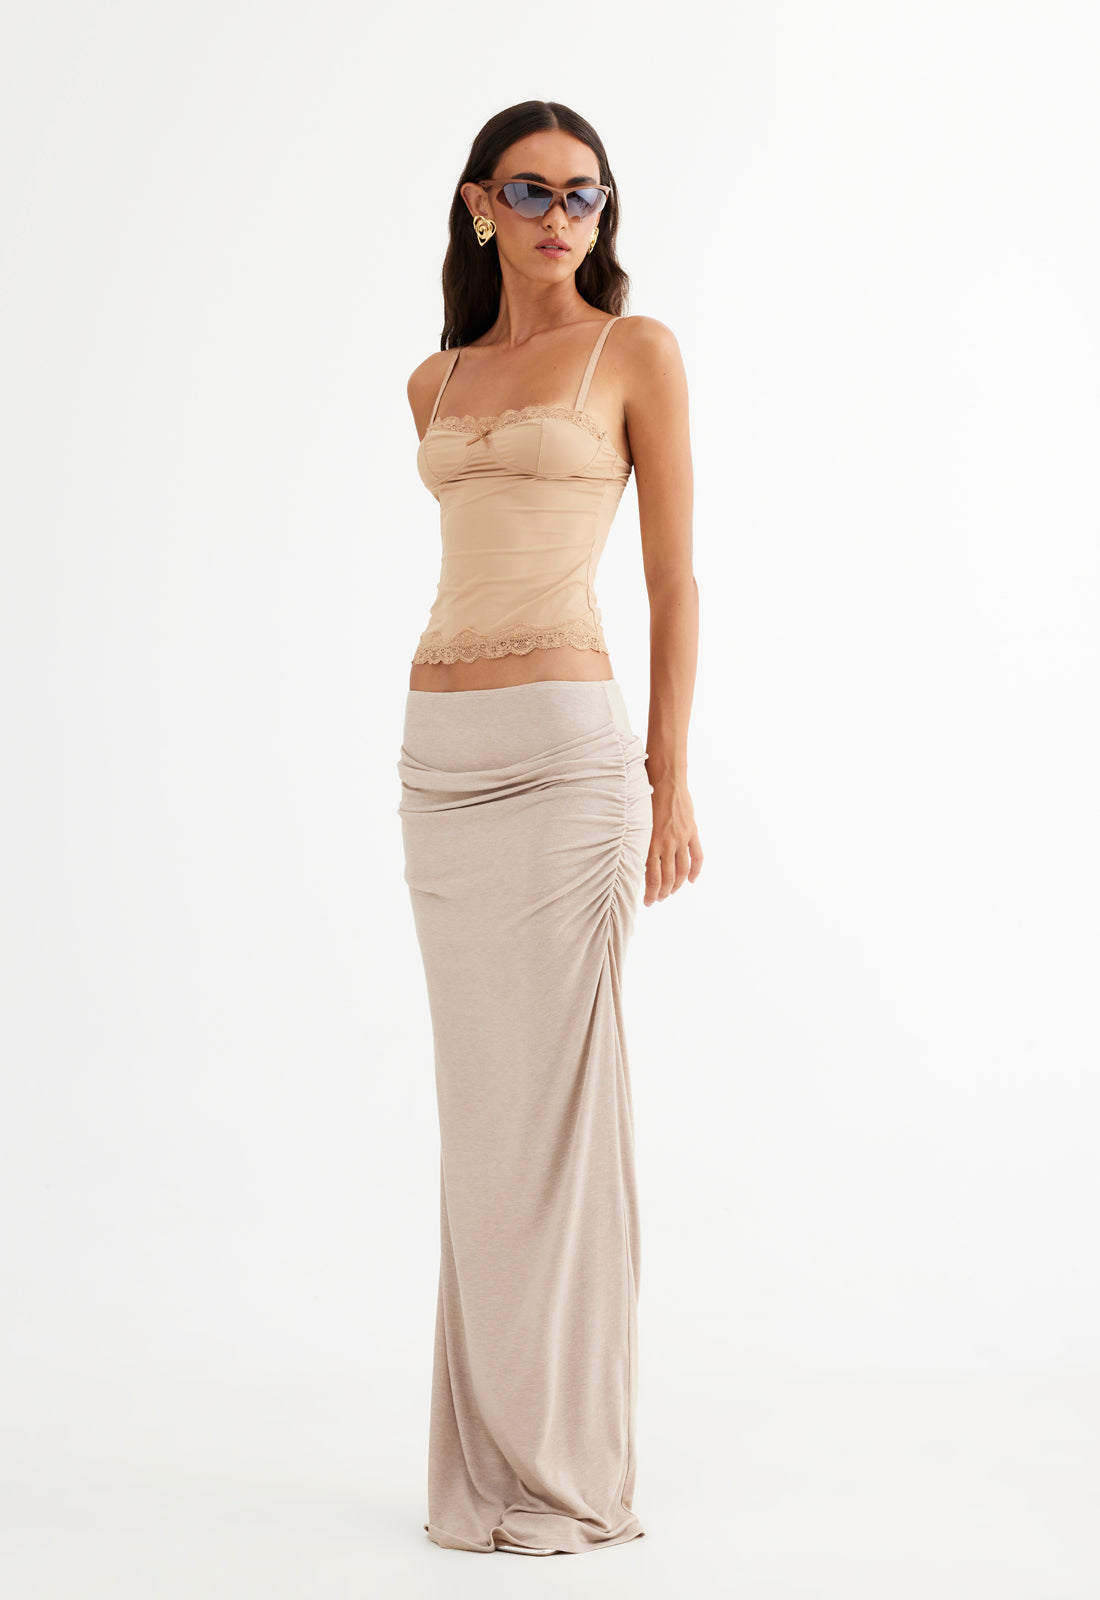 ALMOST FAMOUS MAXI - TAUPE